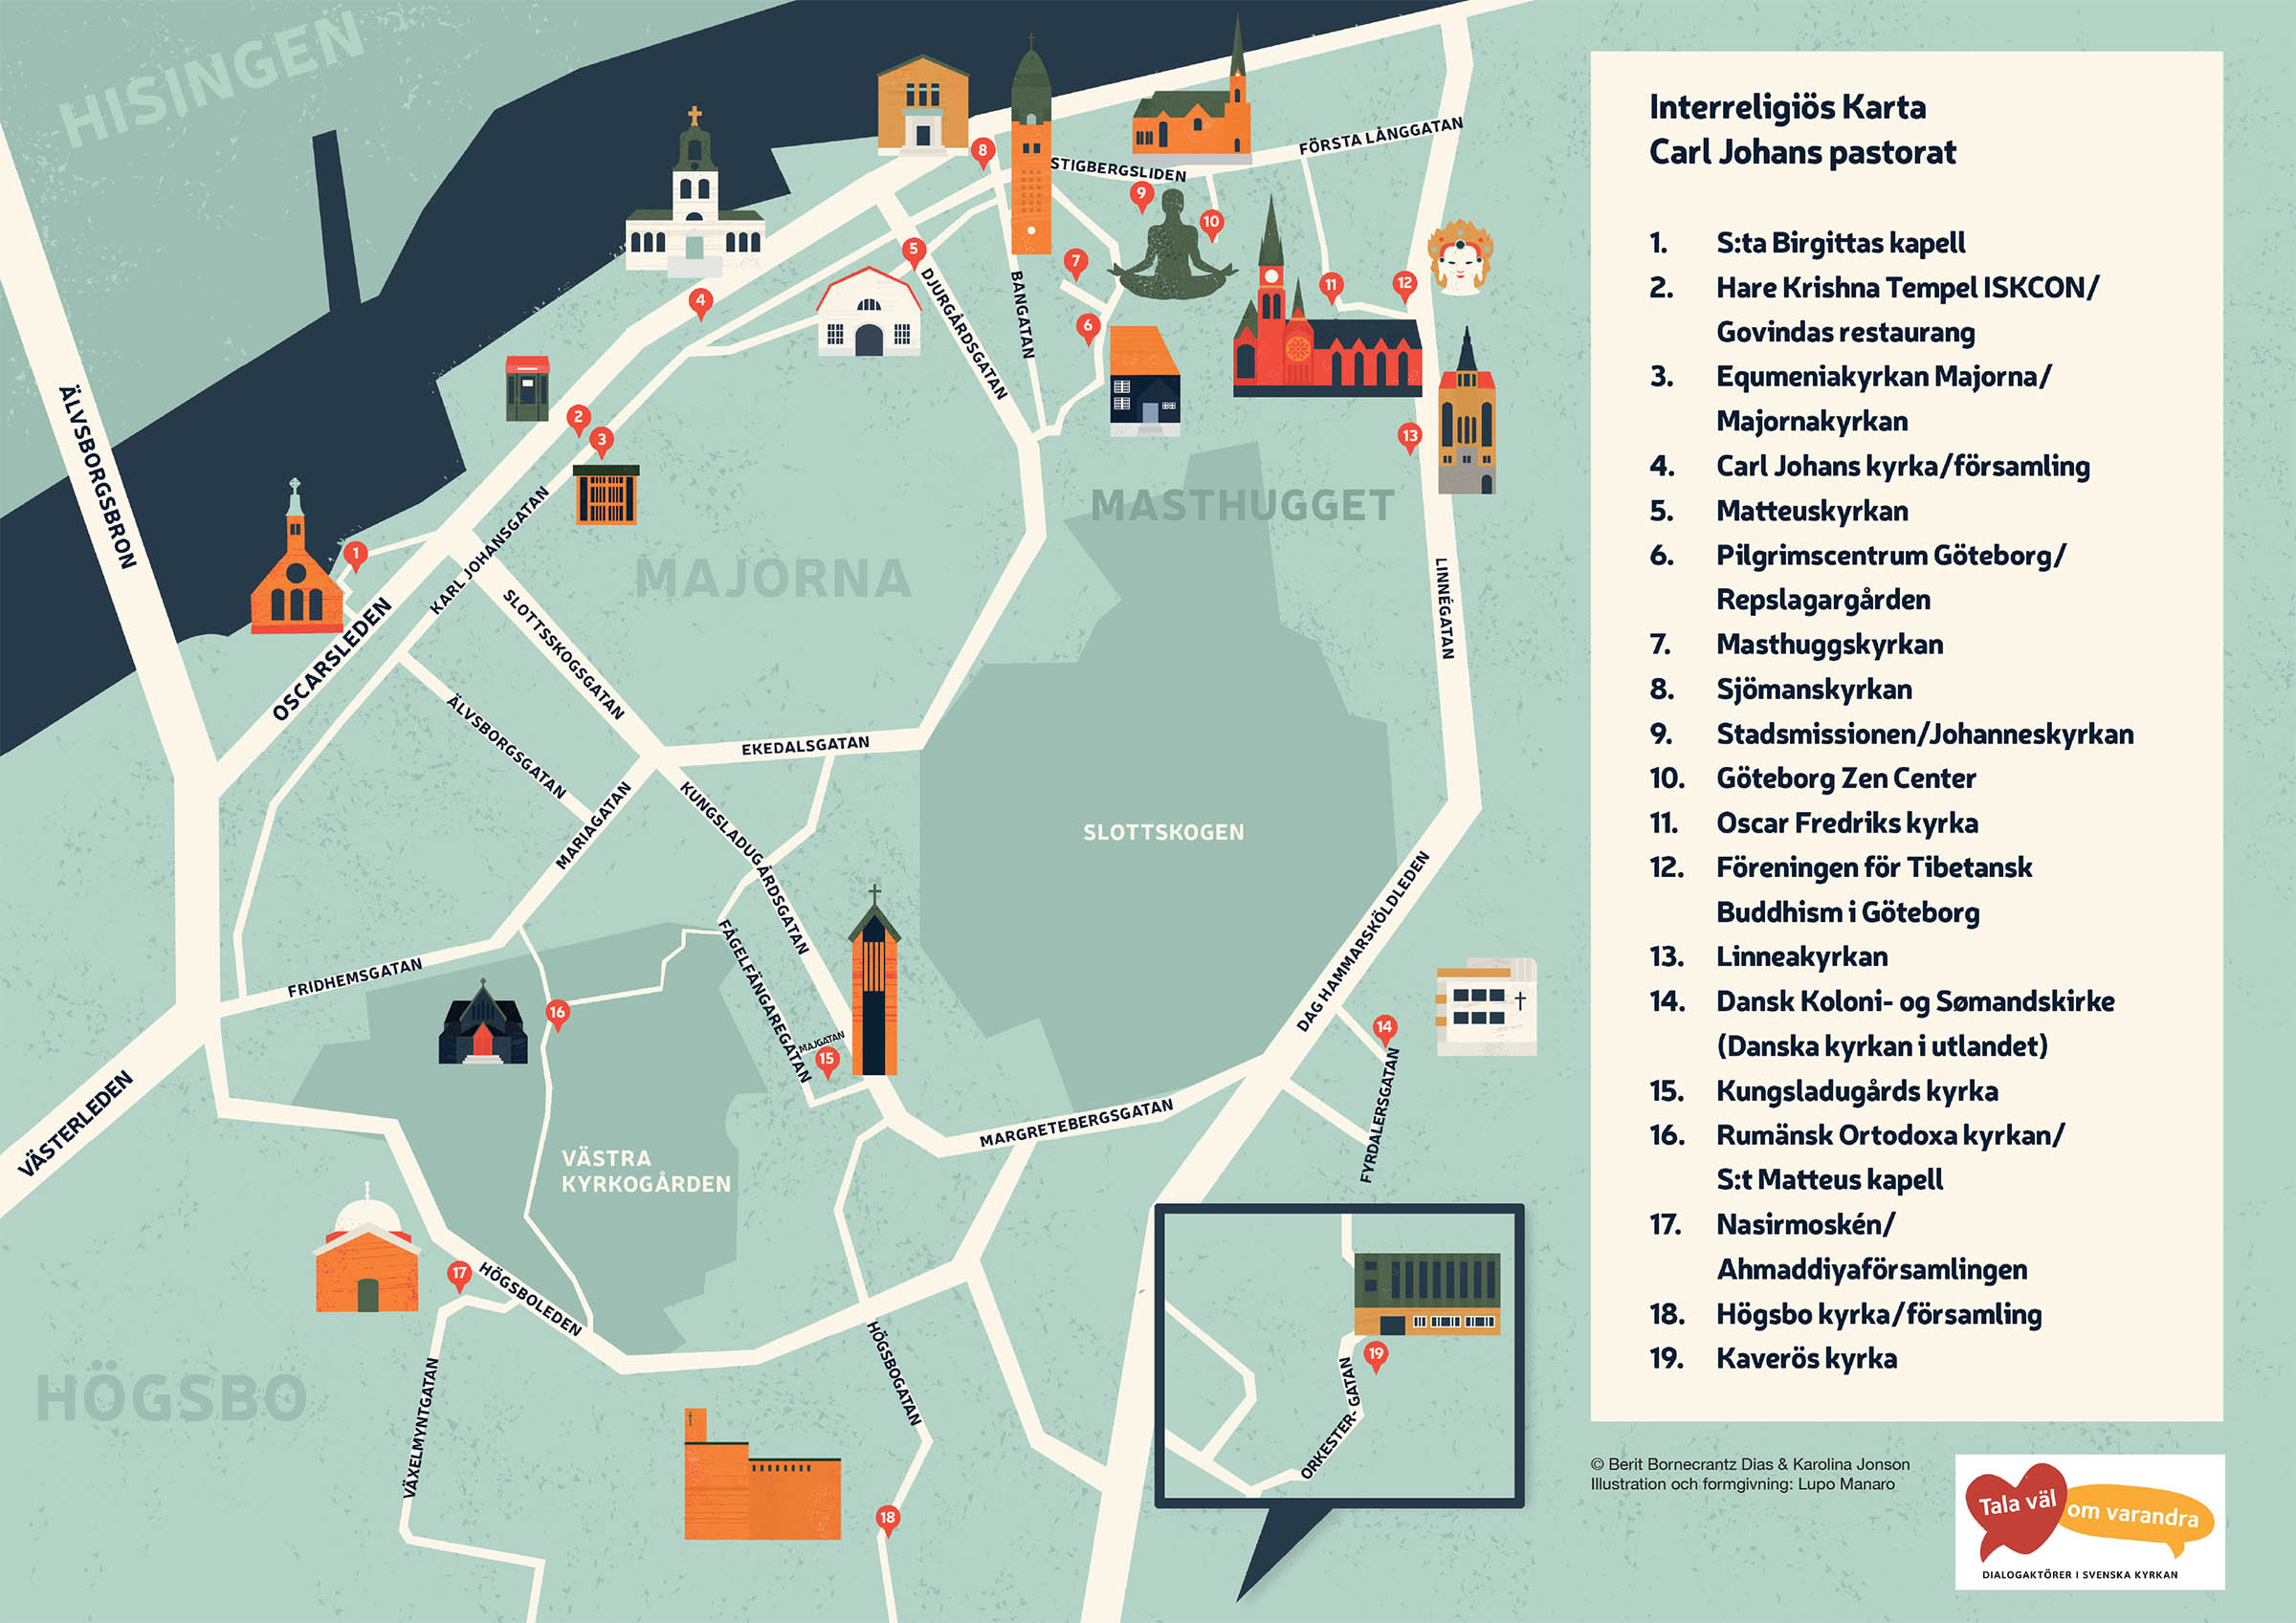 A map of different religious buildings in and around Majorna, Gothenburg.